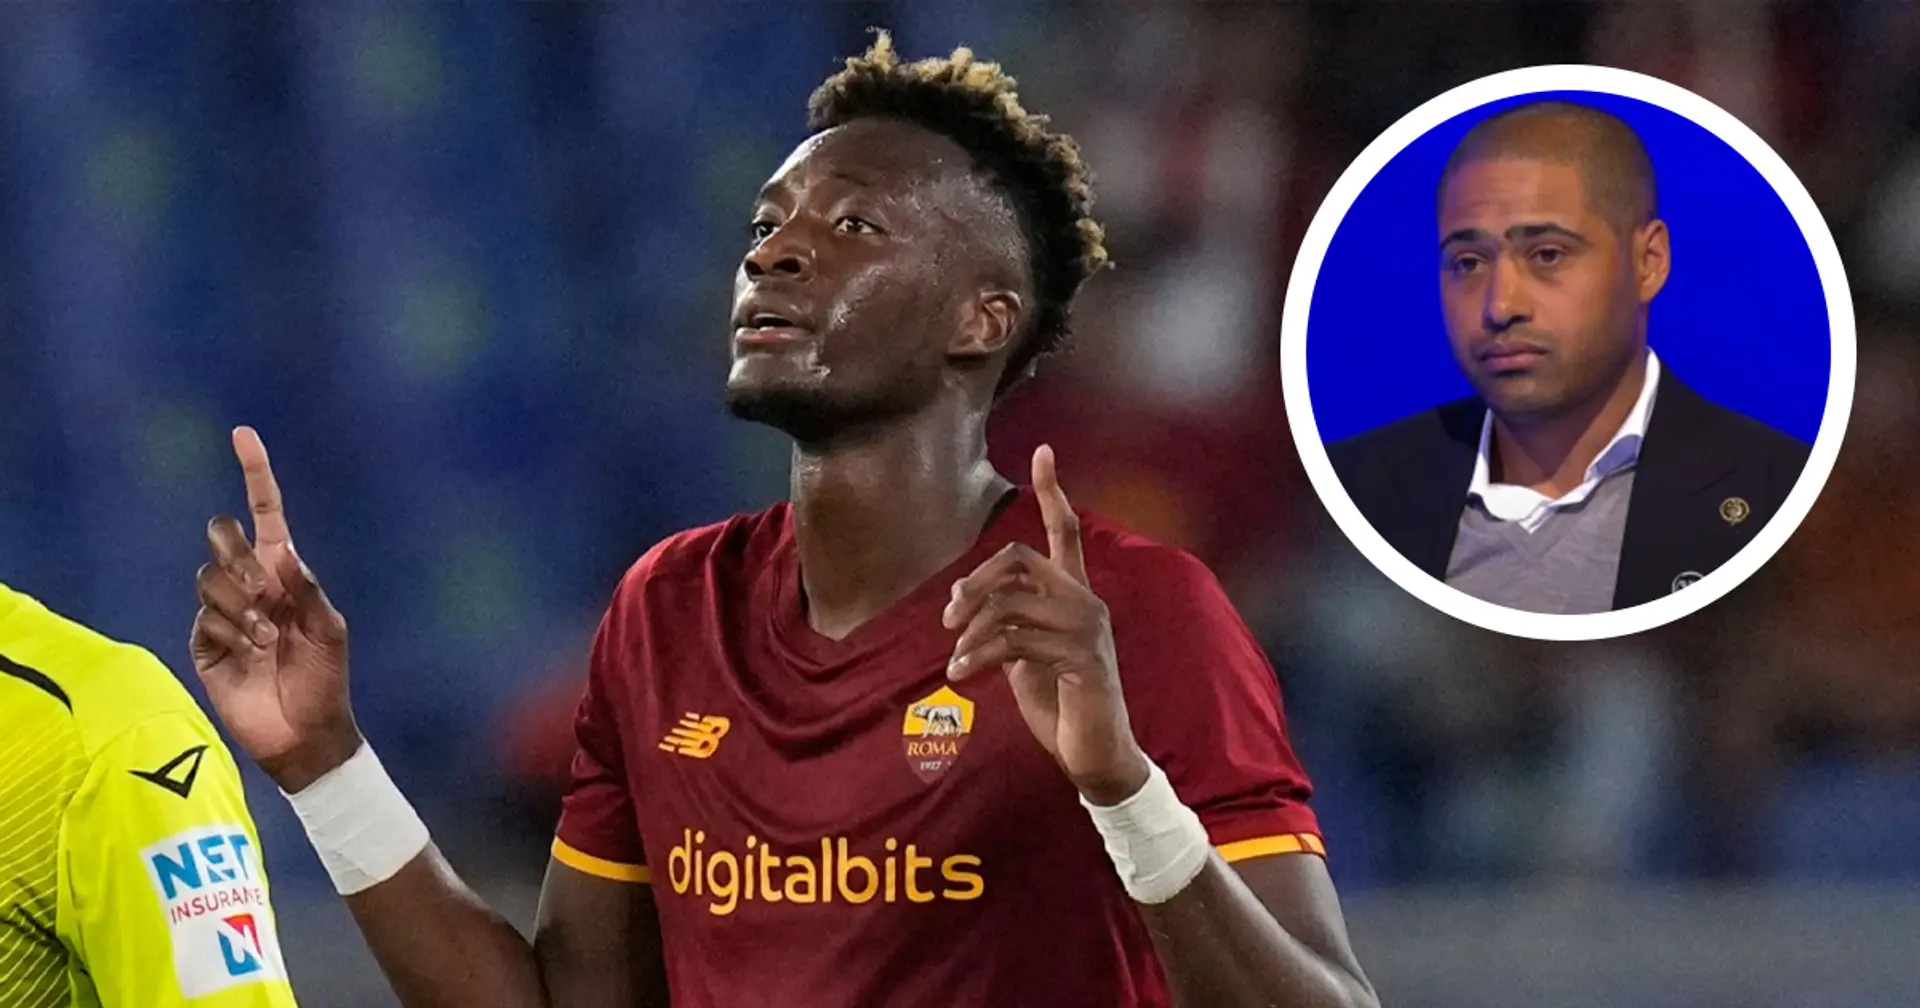 'He’s going to be hard to look past': Glen Johnson believes Tammy Abraham could return to Chelsea in future